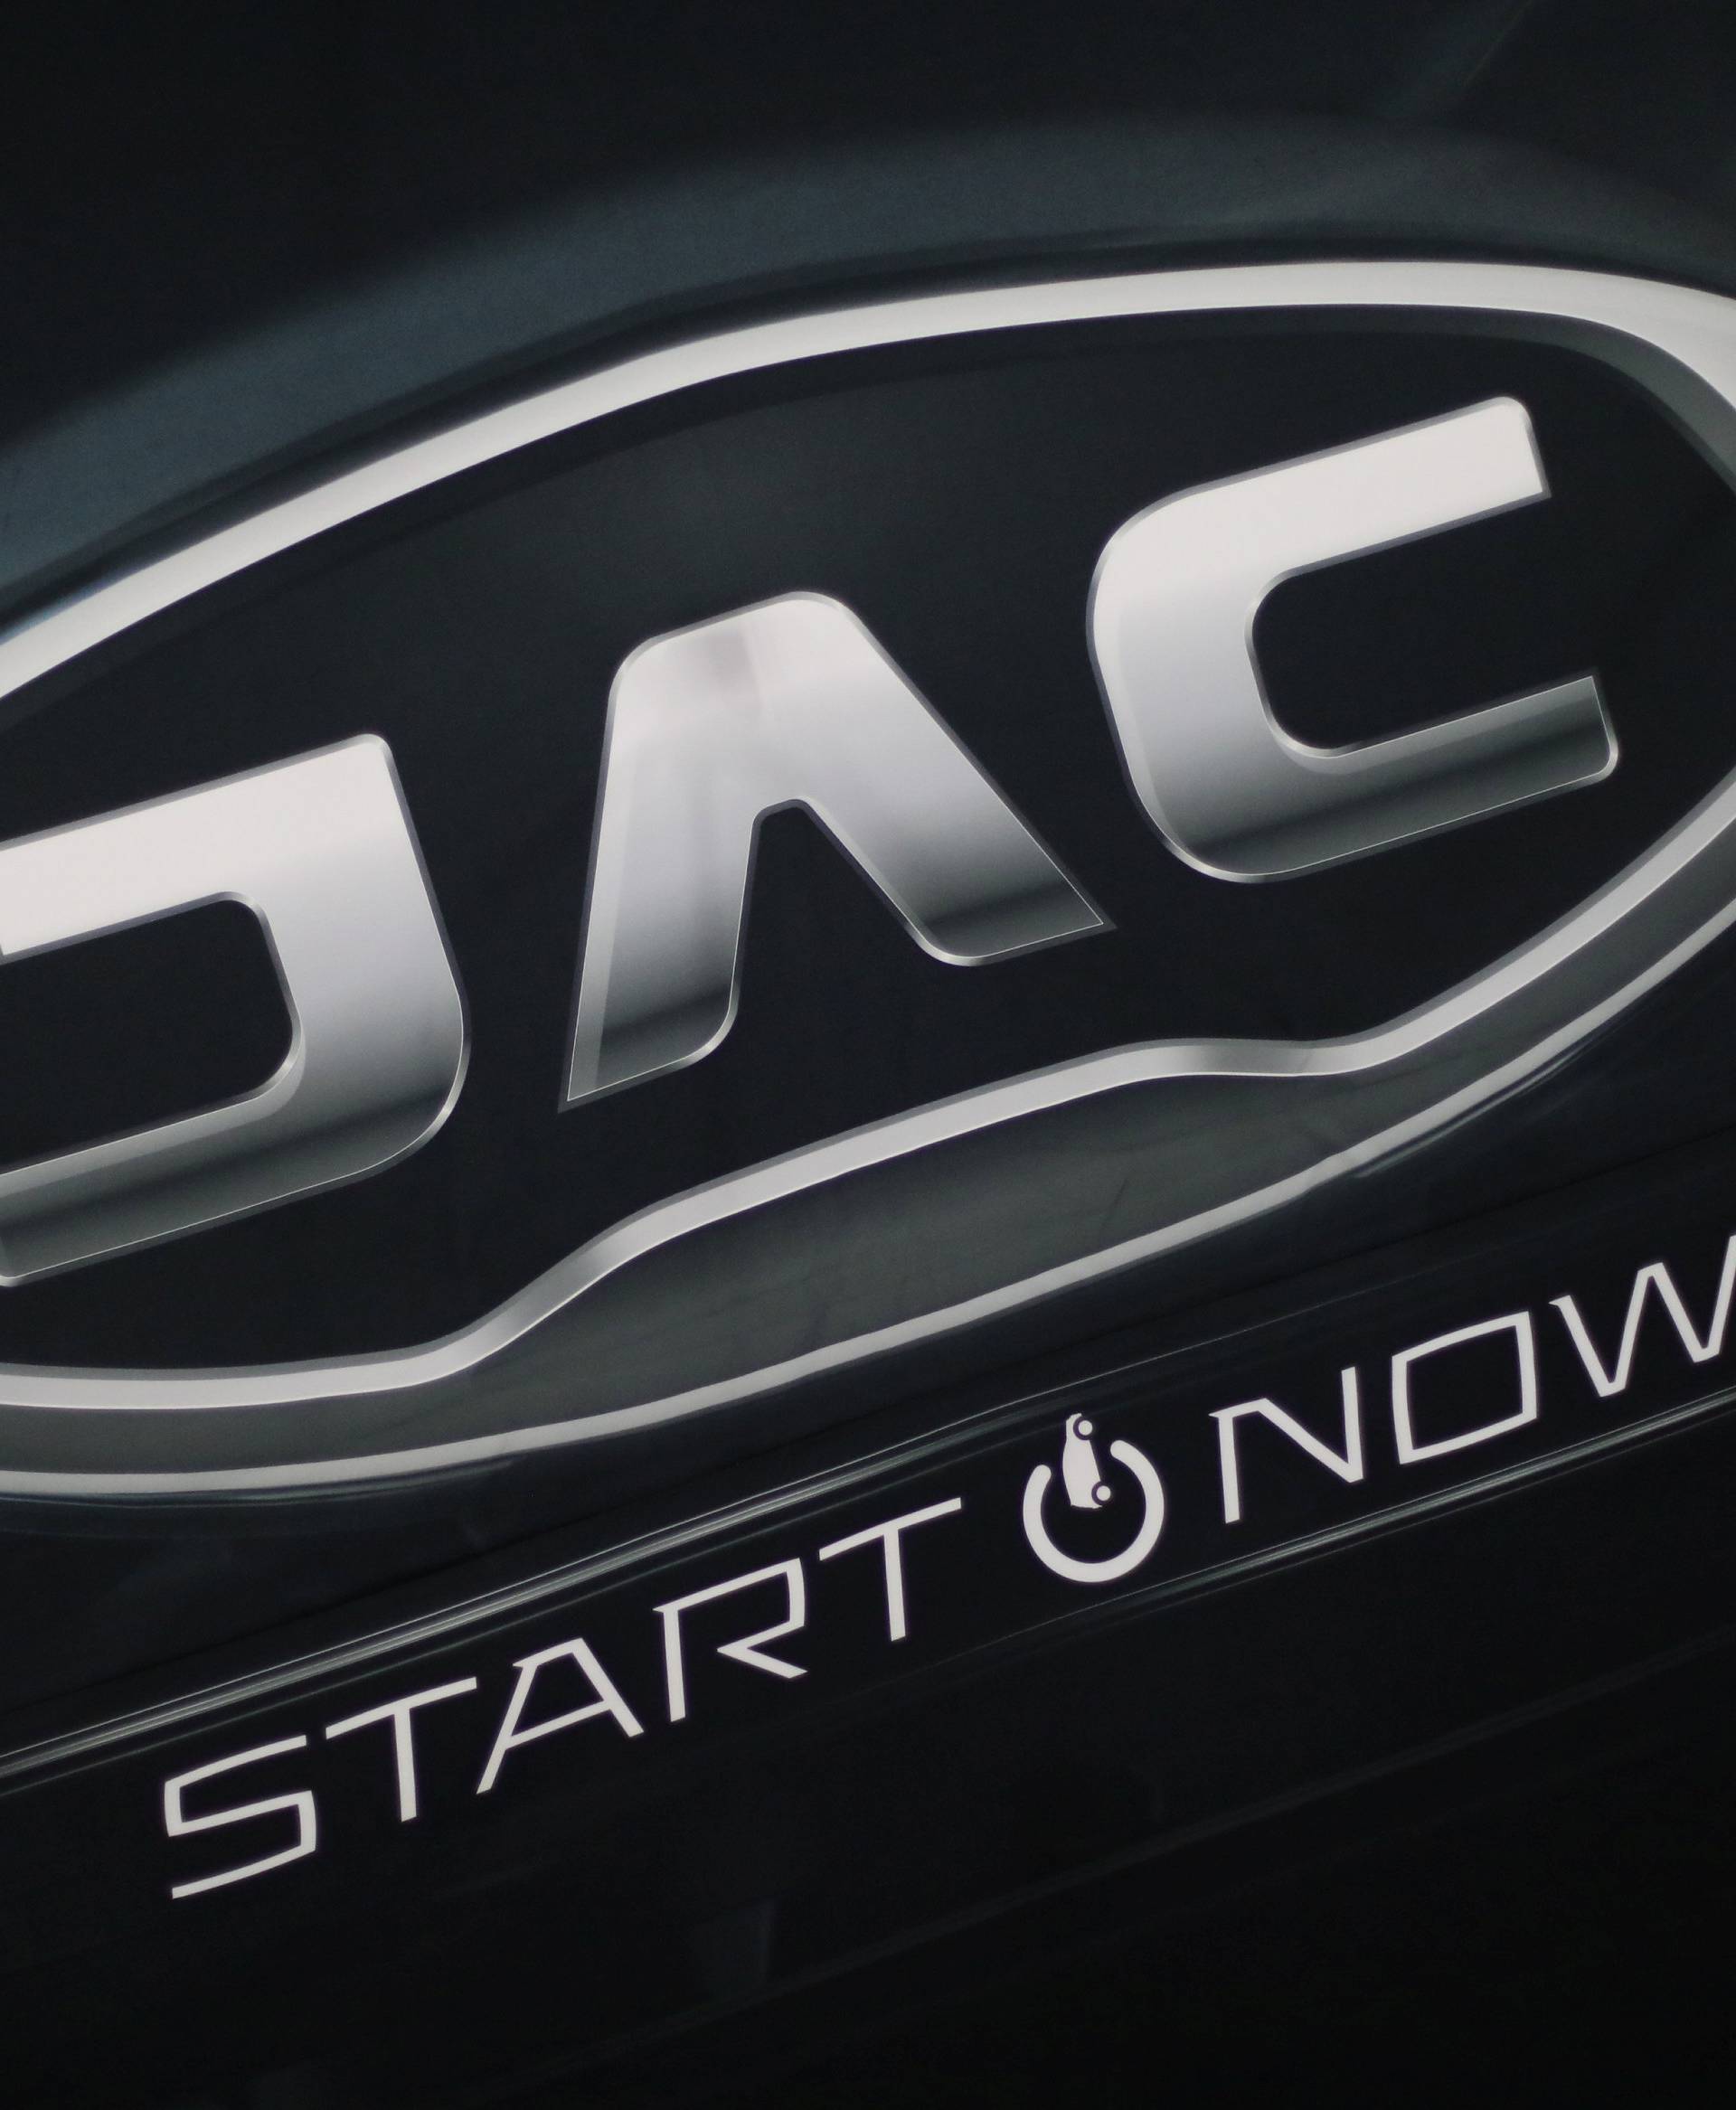 A JAC Motors logo is pictured in Mexico City